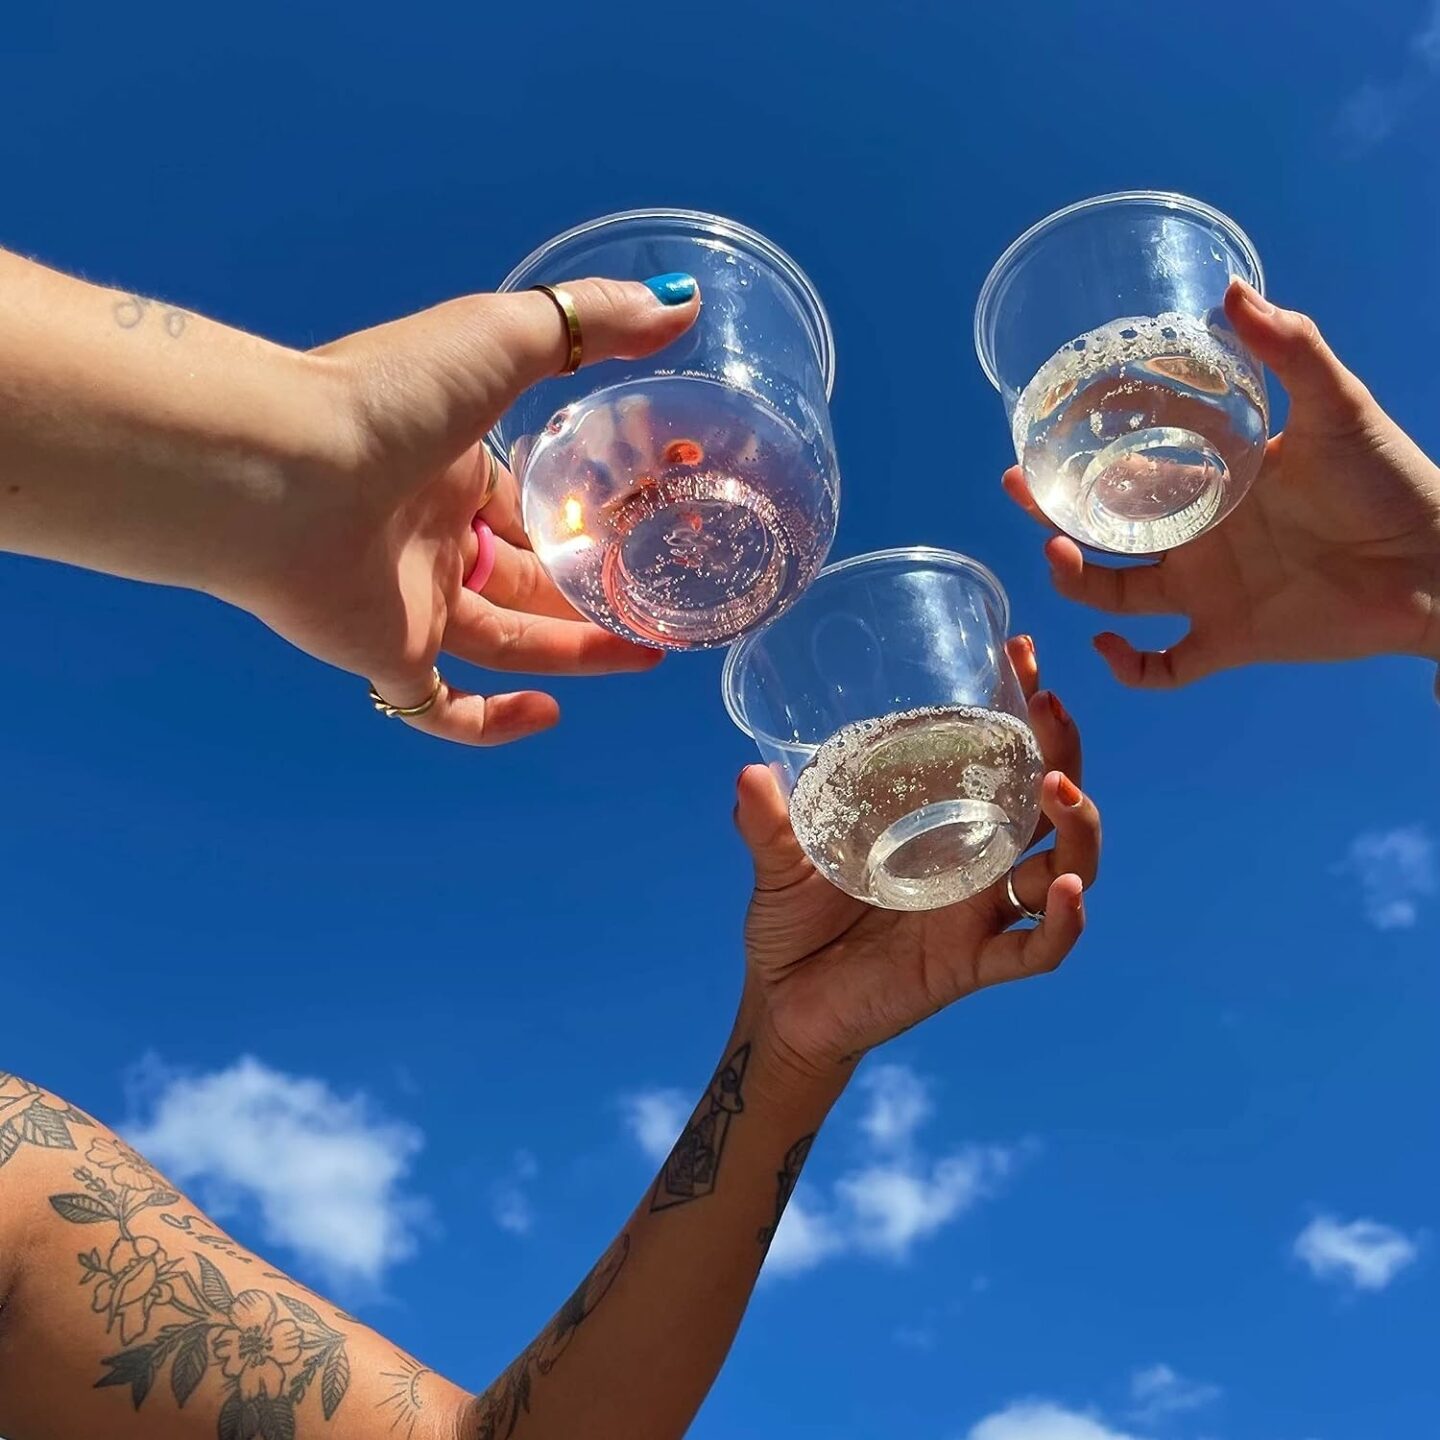 Three people cheering with stemless wine glasses made of disposable plastic